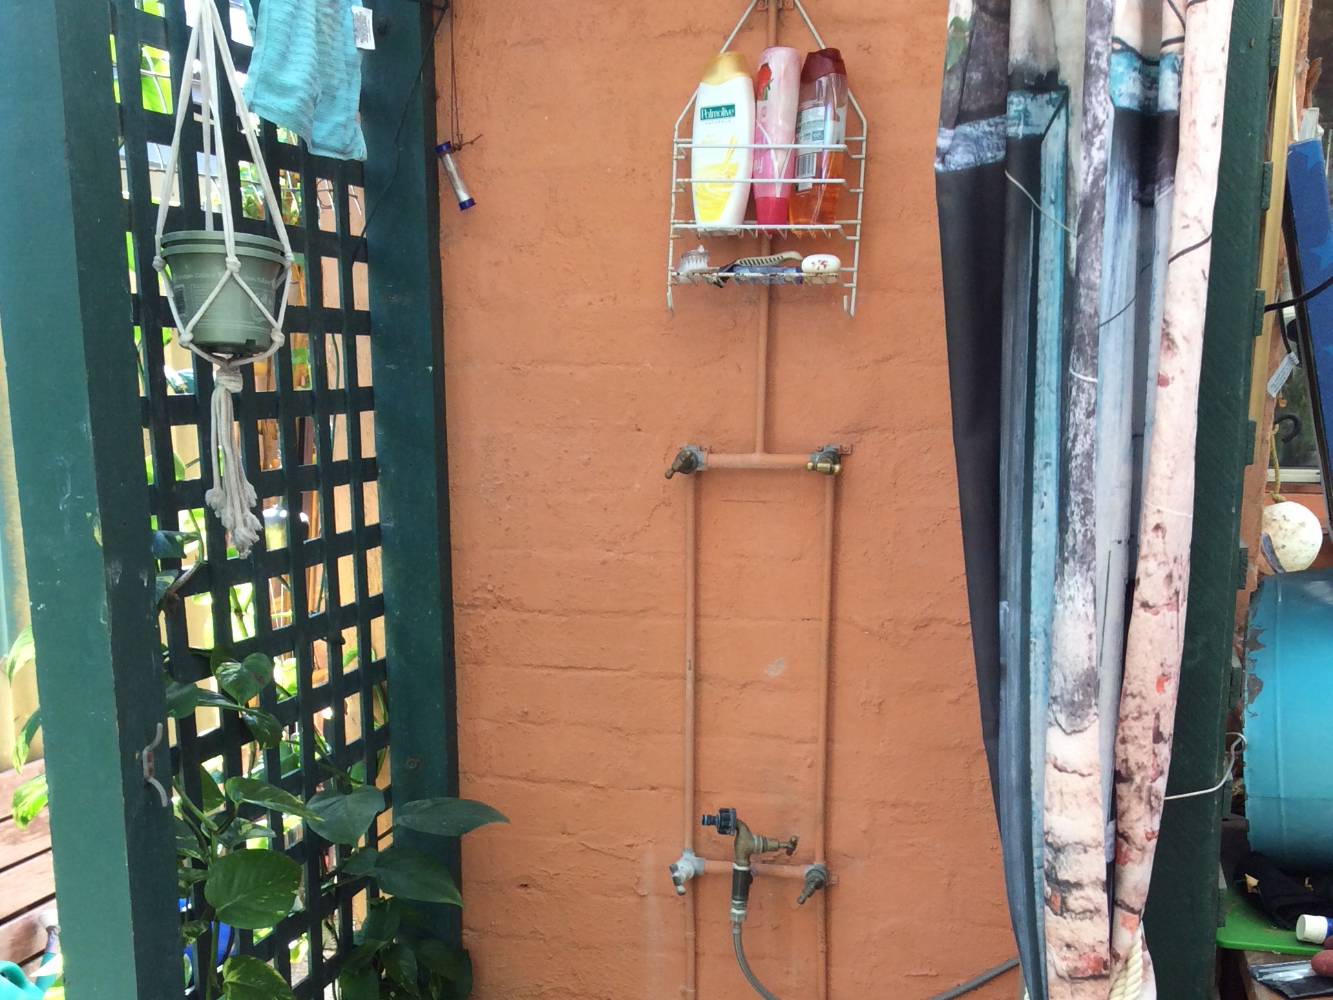 Outdoor shower (second bathroom) has hot and cold water